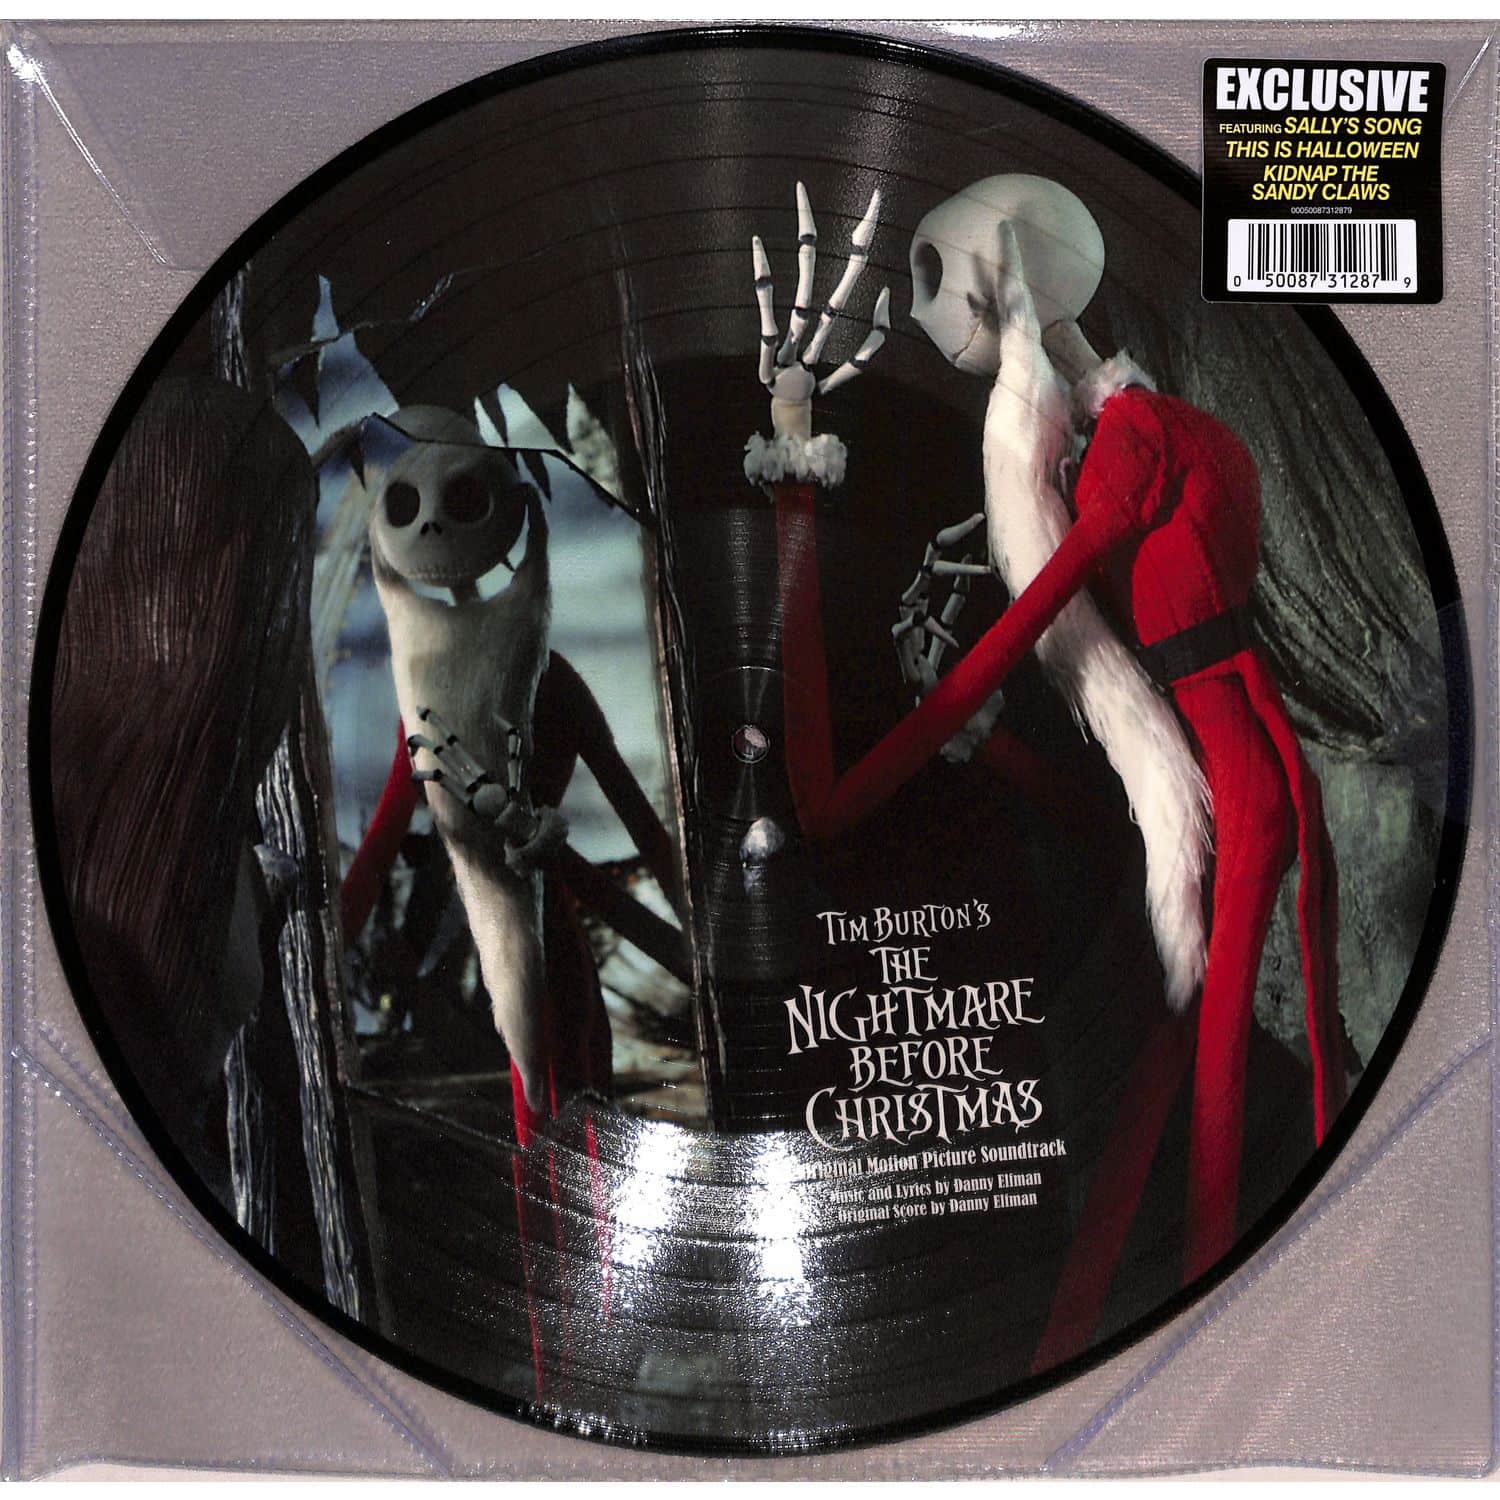 OST/VARIOUS - THE NIGHTMARE BEFORE CHRISTMAS 